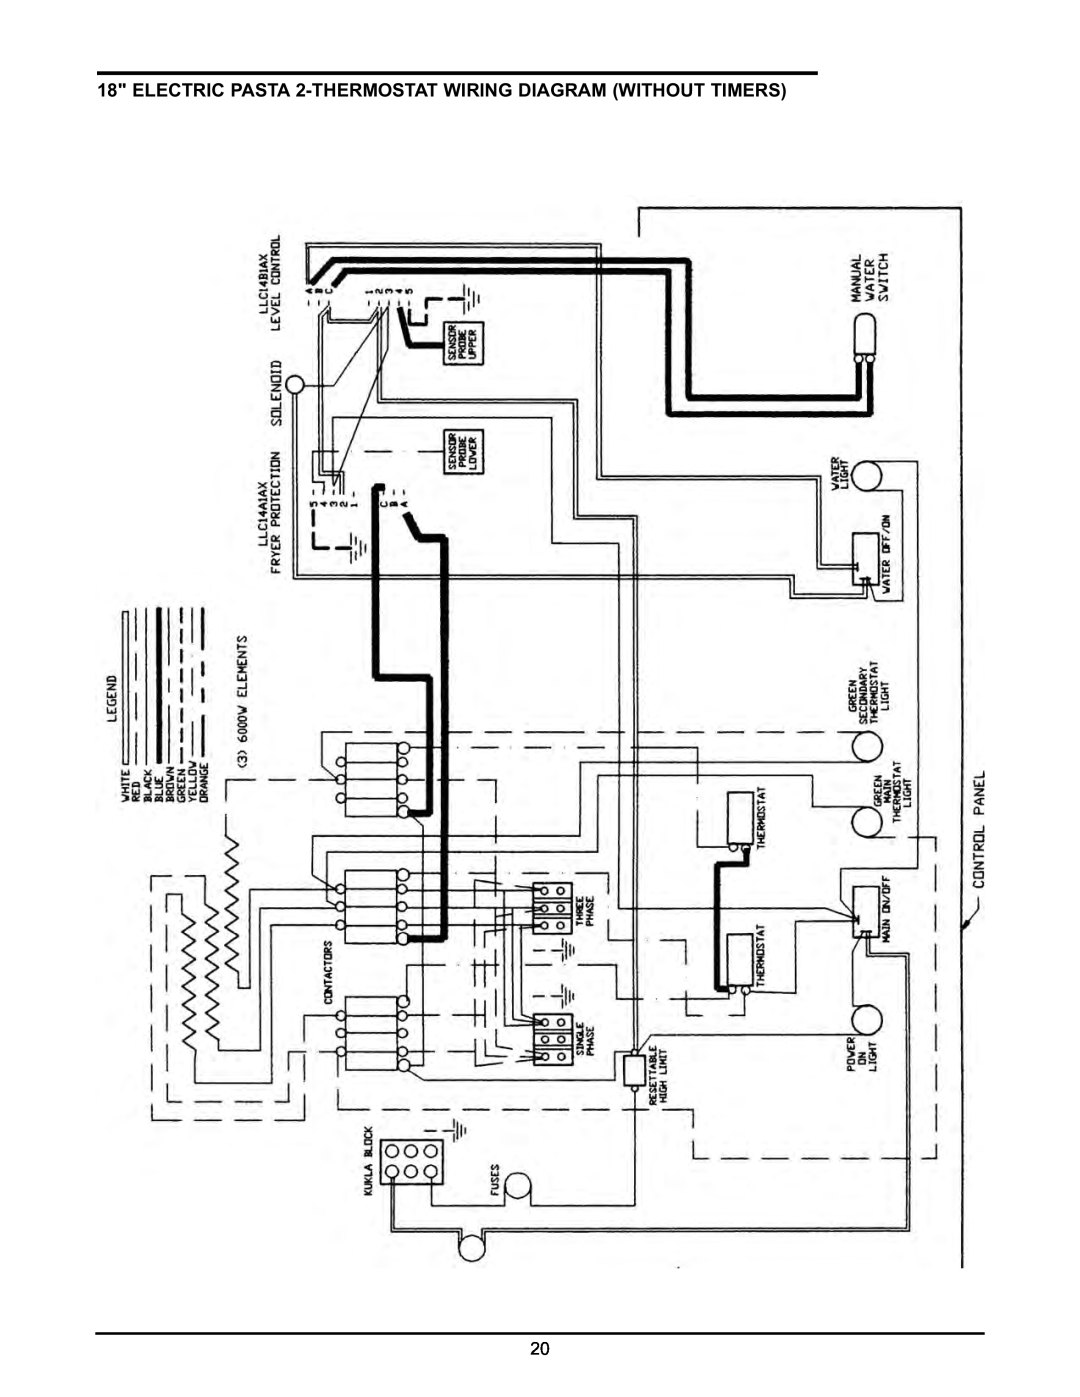 Keating Of Chicago 2009 manual ELECTRIC PASTA 2-THERMOSTAT WIRING DIAGRAM WITHOUT TIMERS 